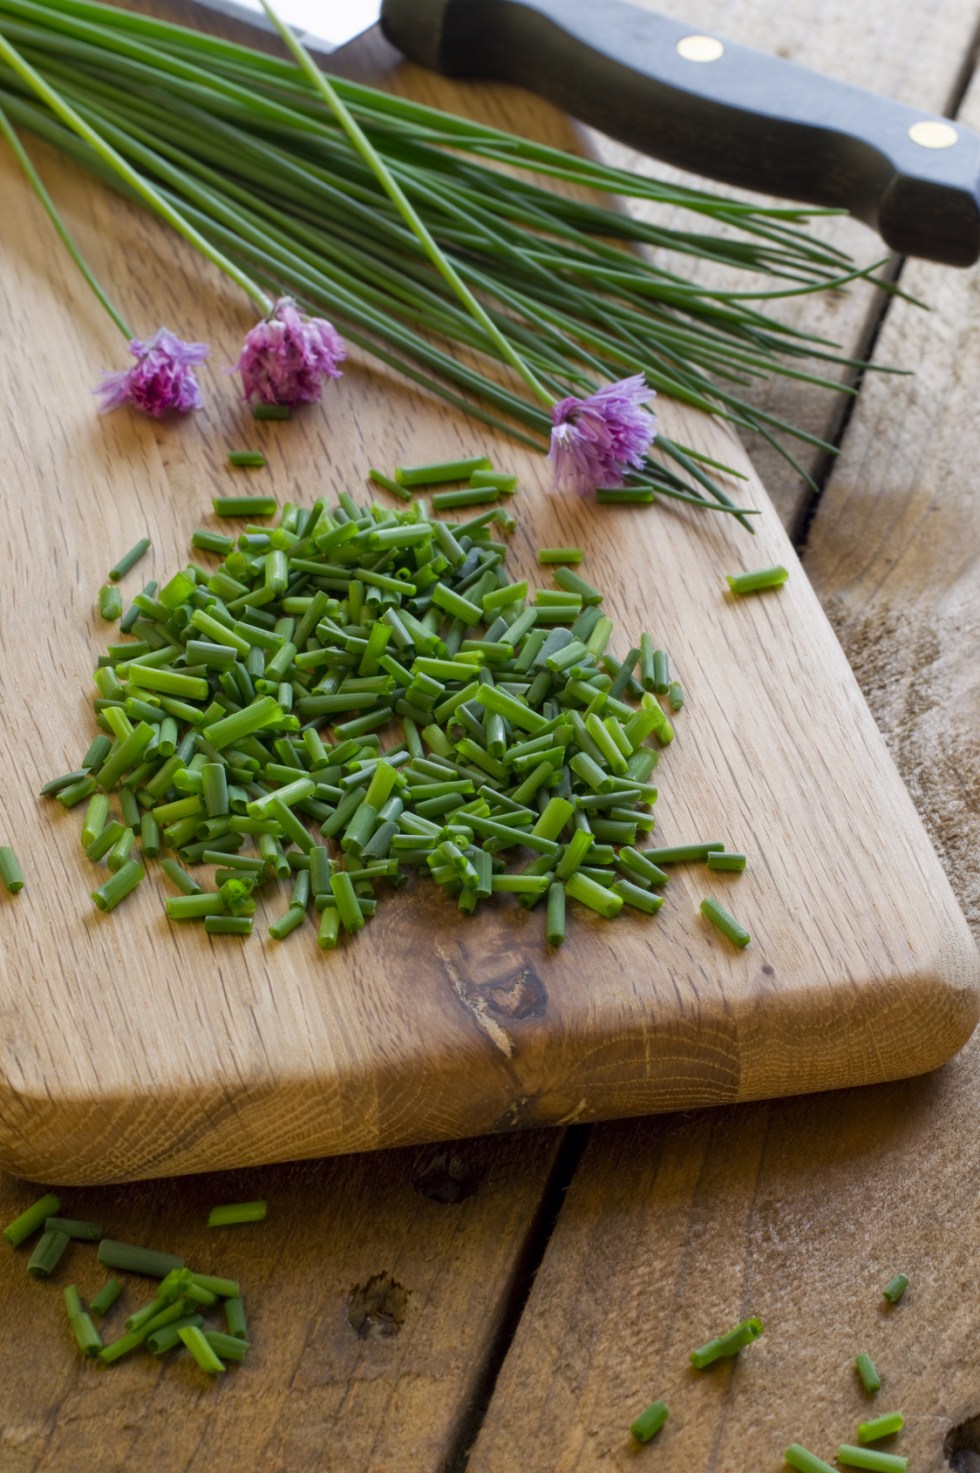 Chopped Herbs – Chives